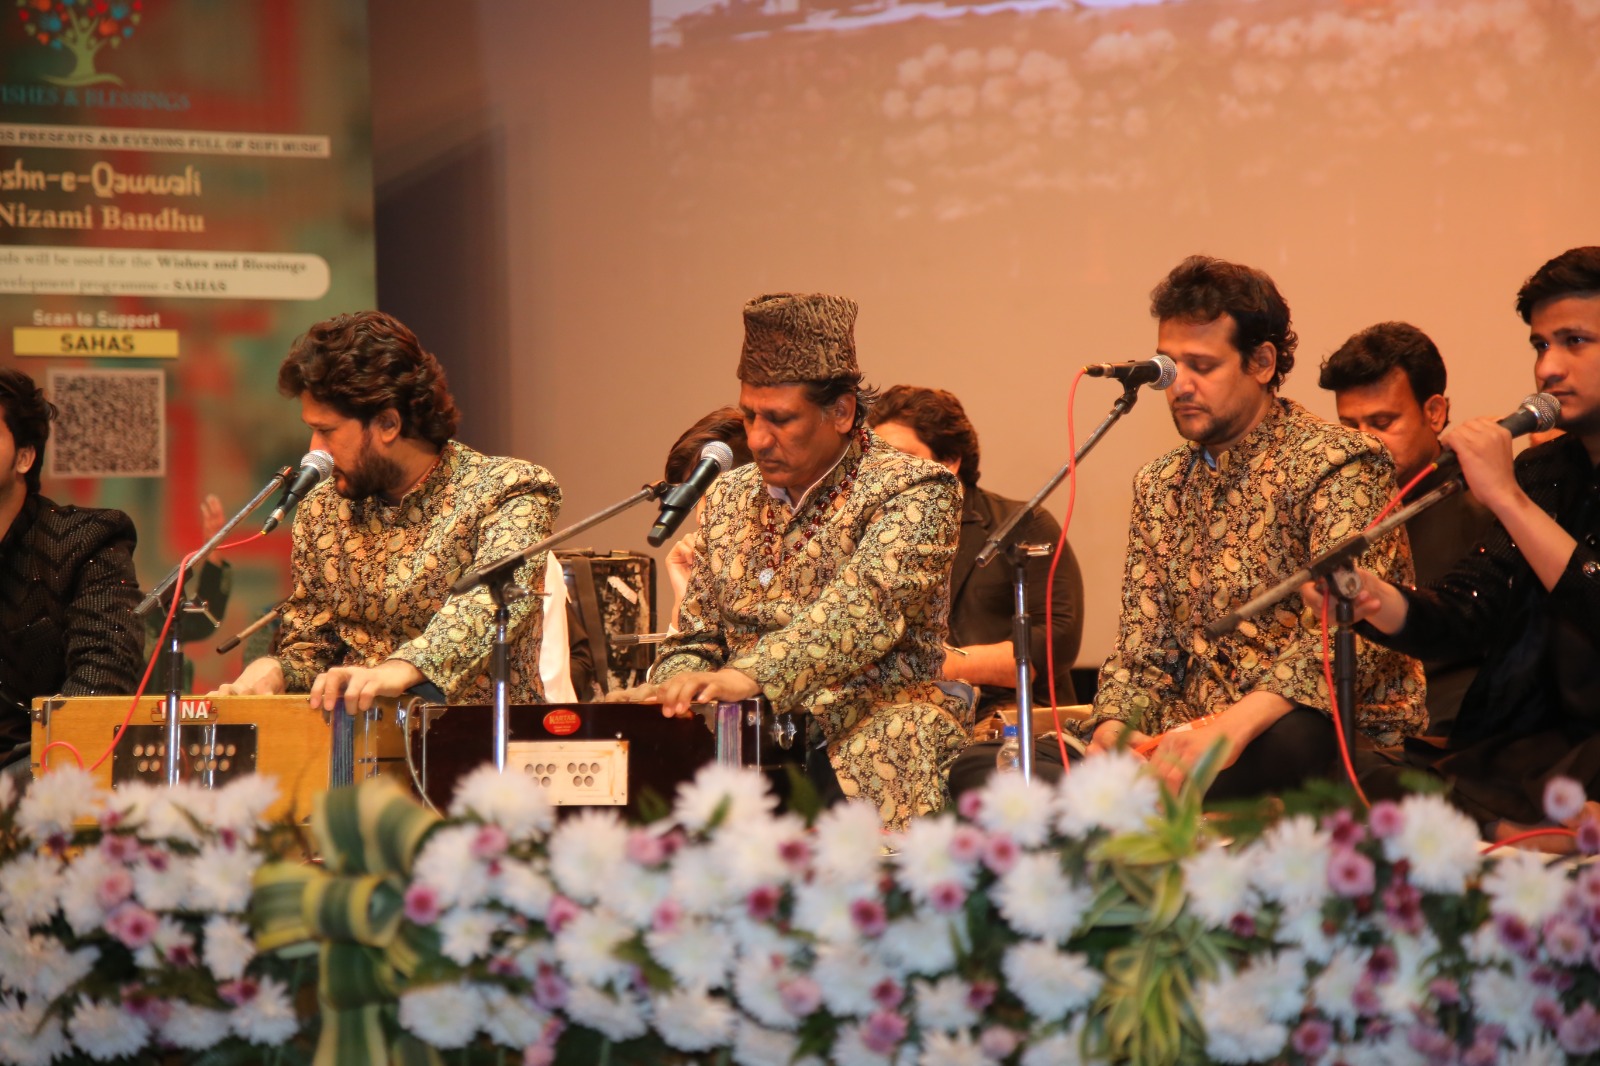 Artisans from the Jashn-e-qawwali musical event performing on the stage